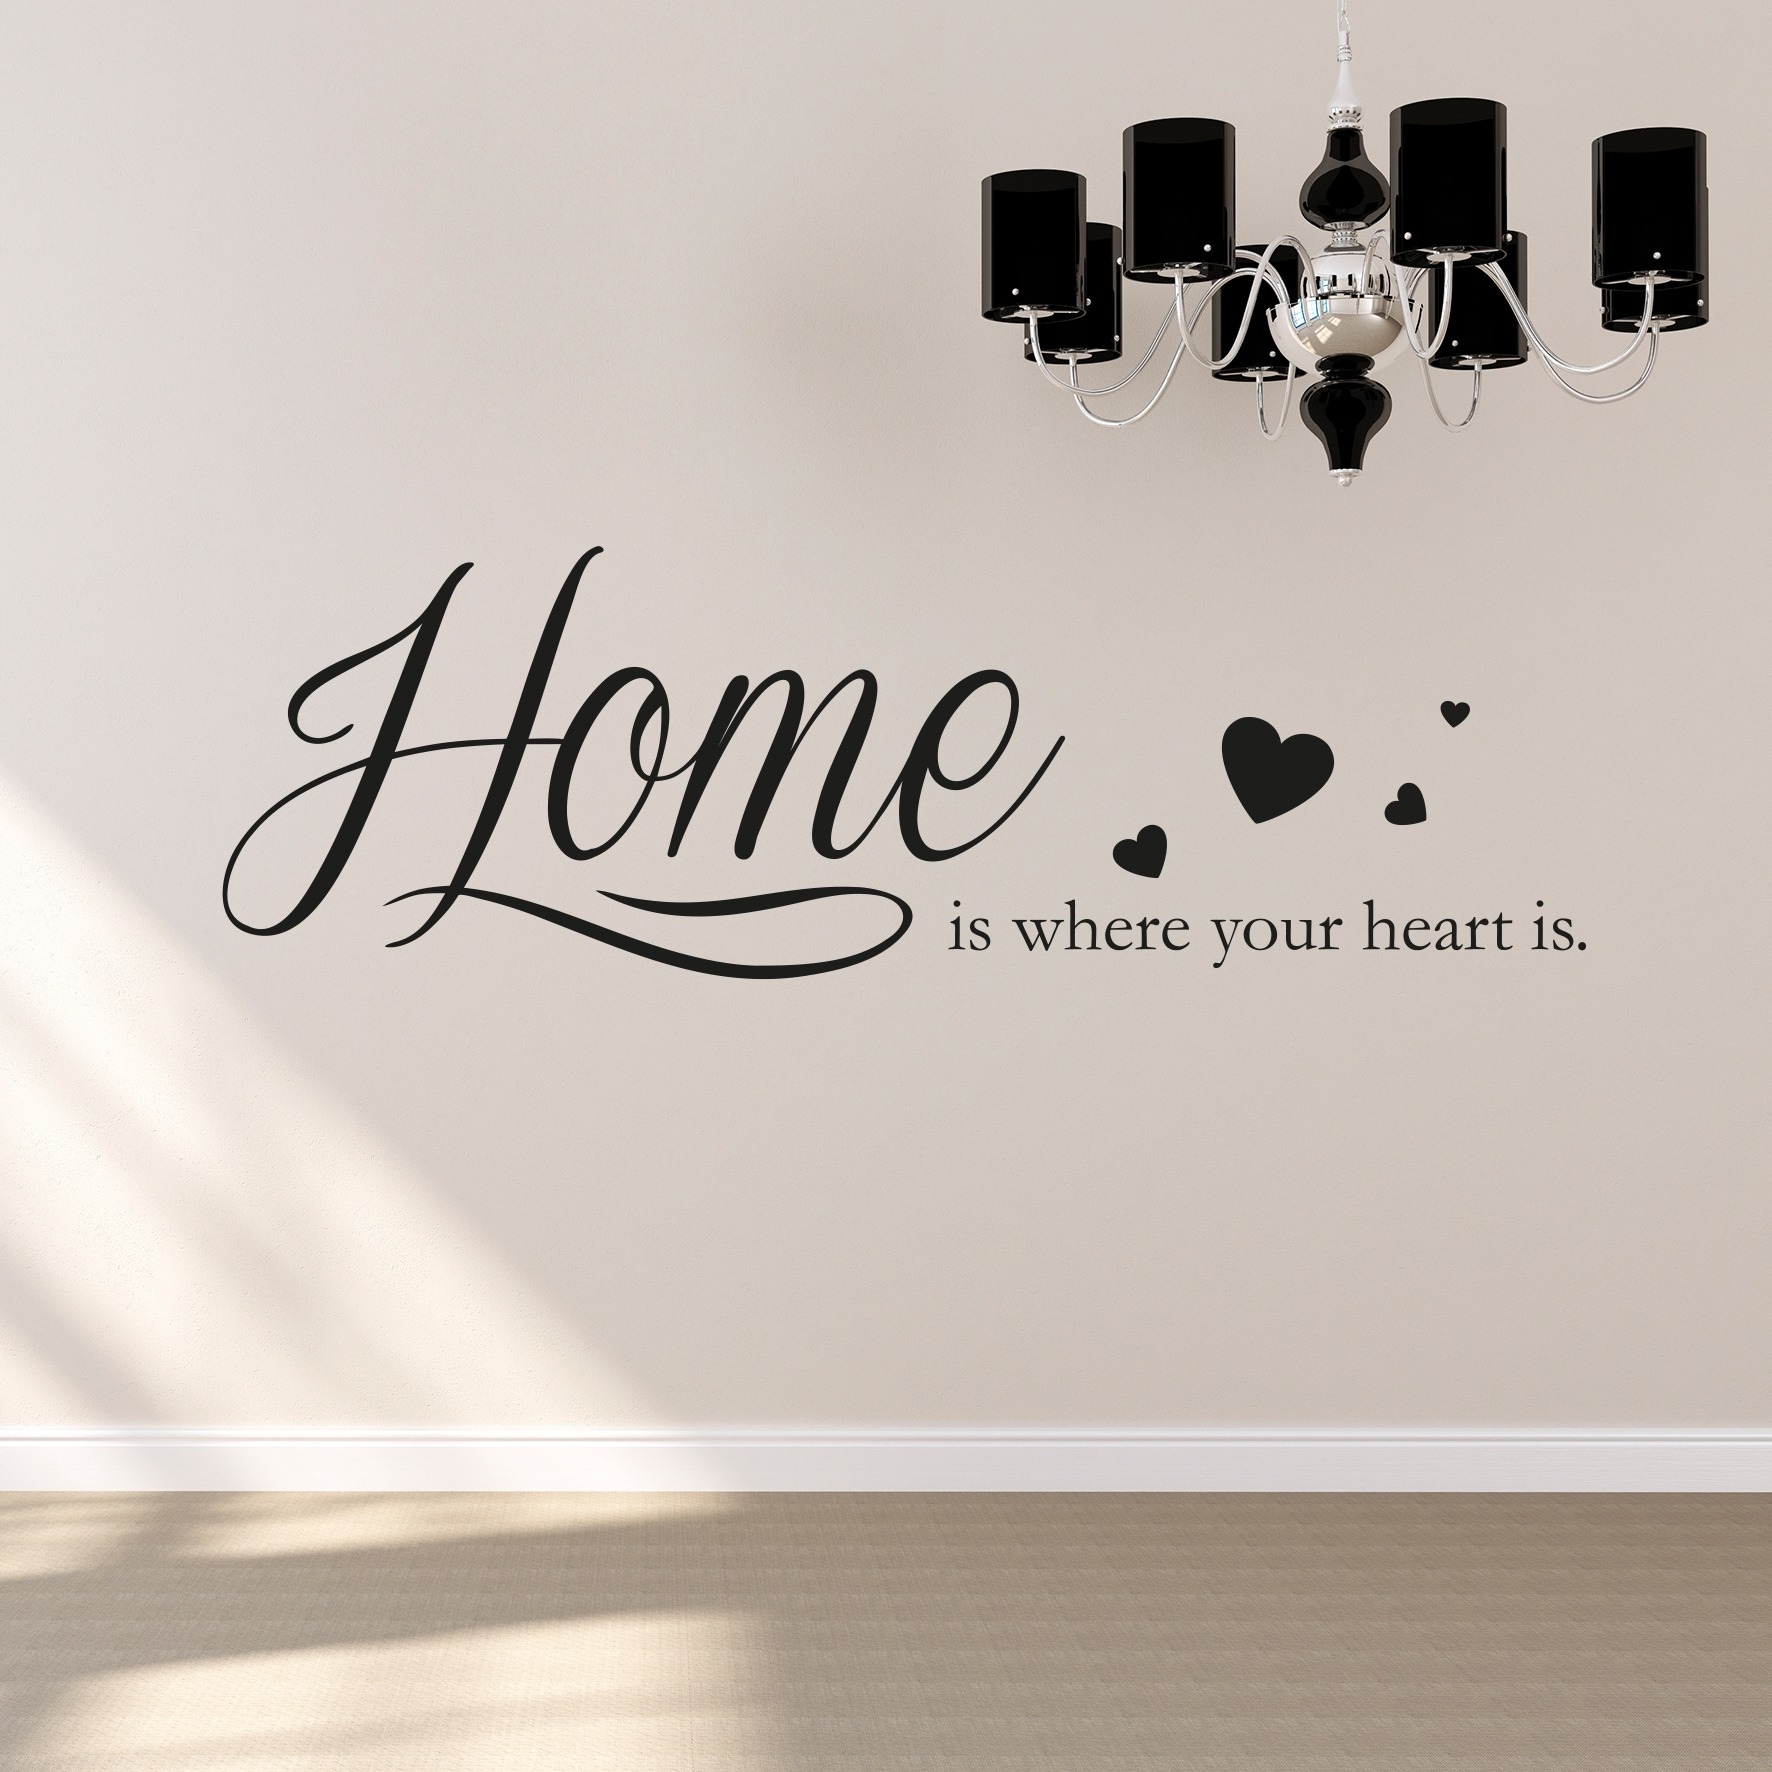 queence Wandtattoo »Home is where your cm BAUR x kaufen is«, | heart 30 120